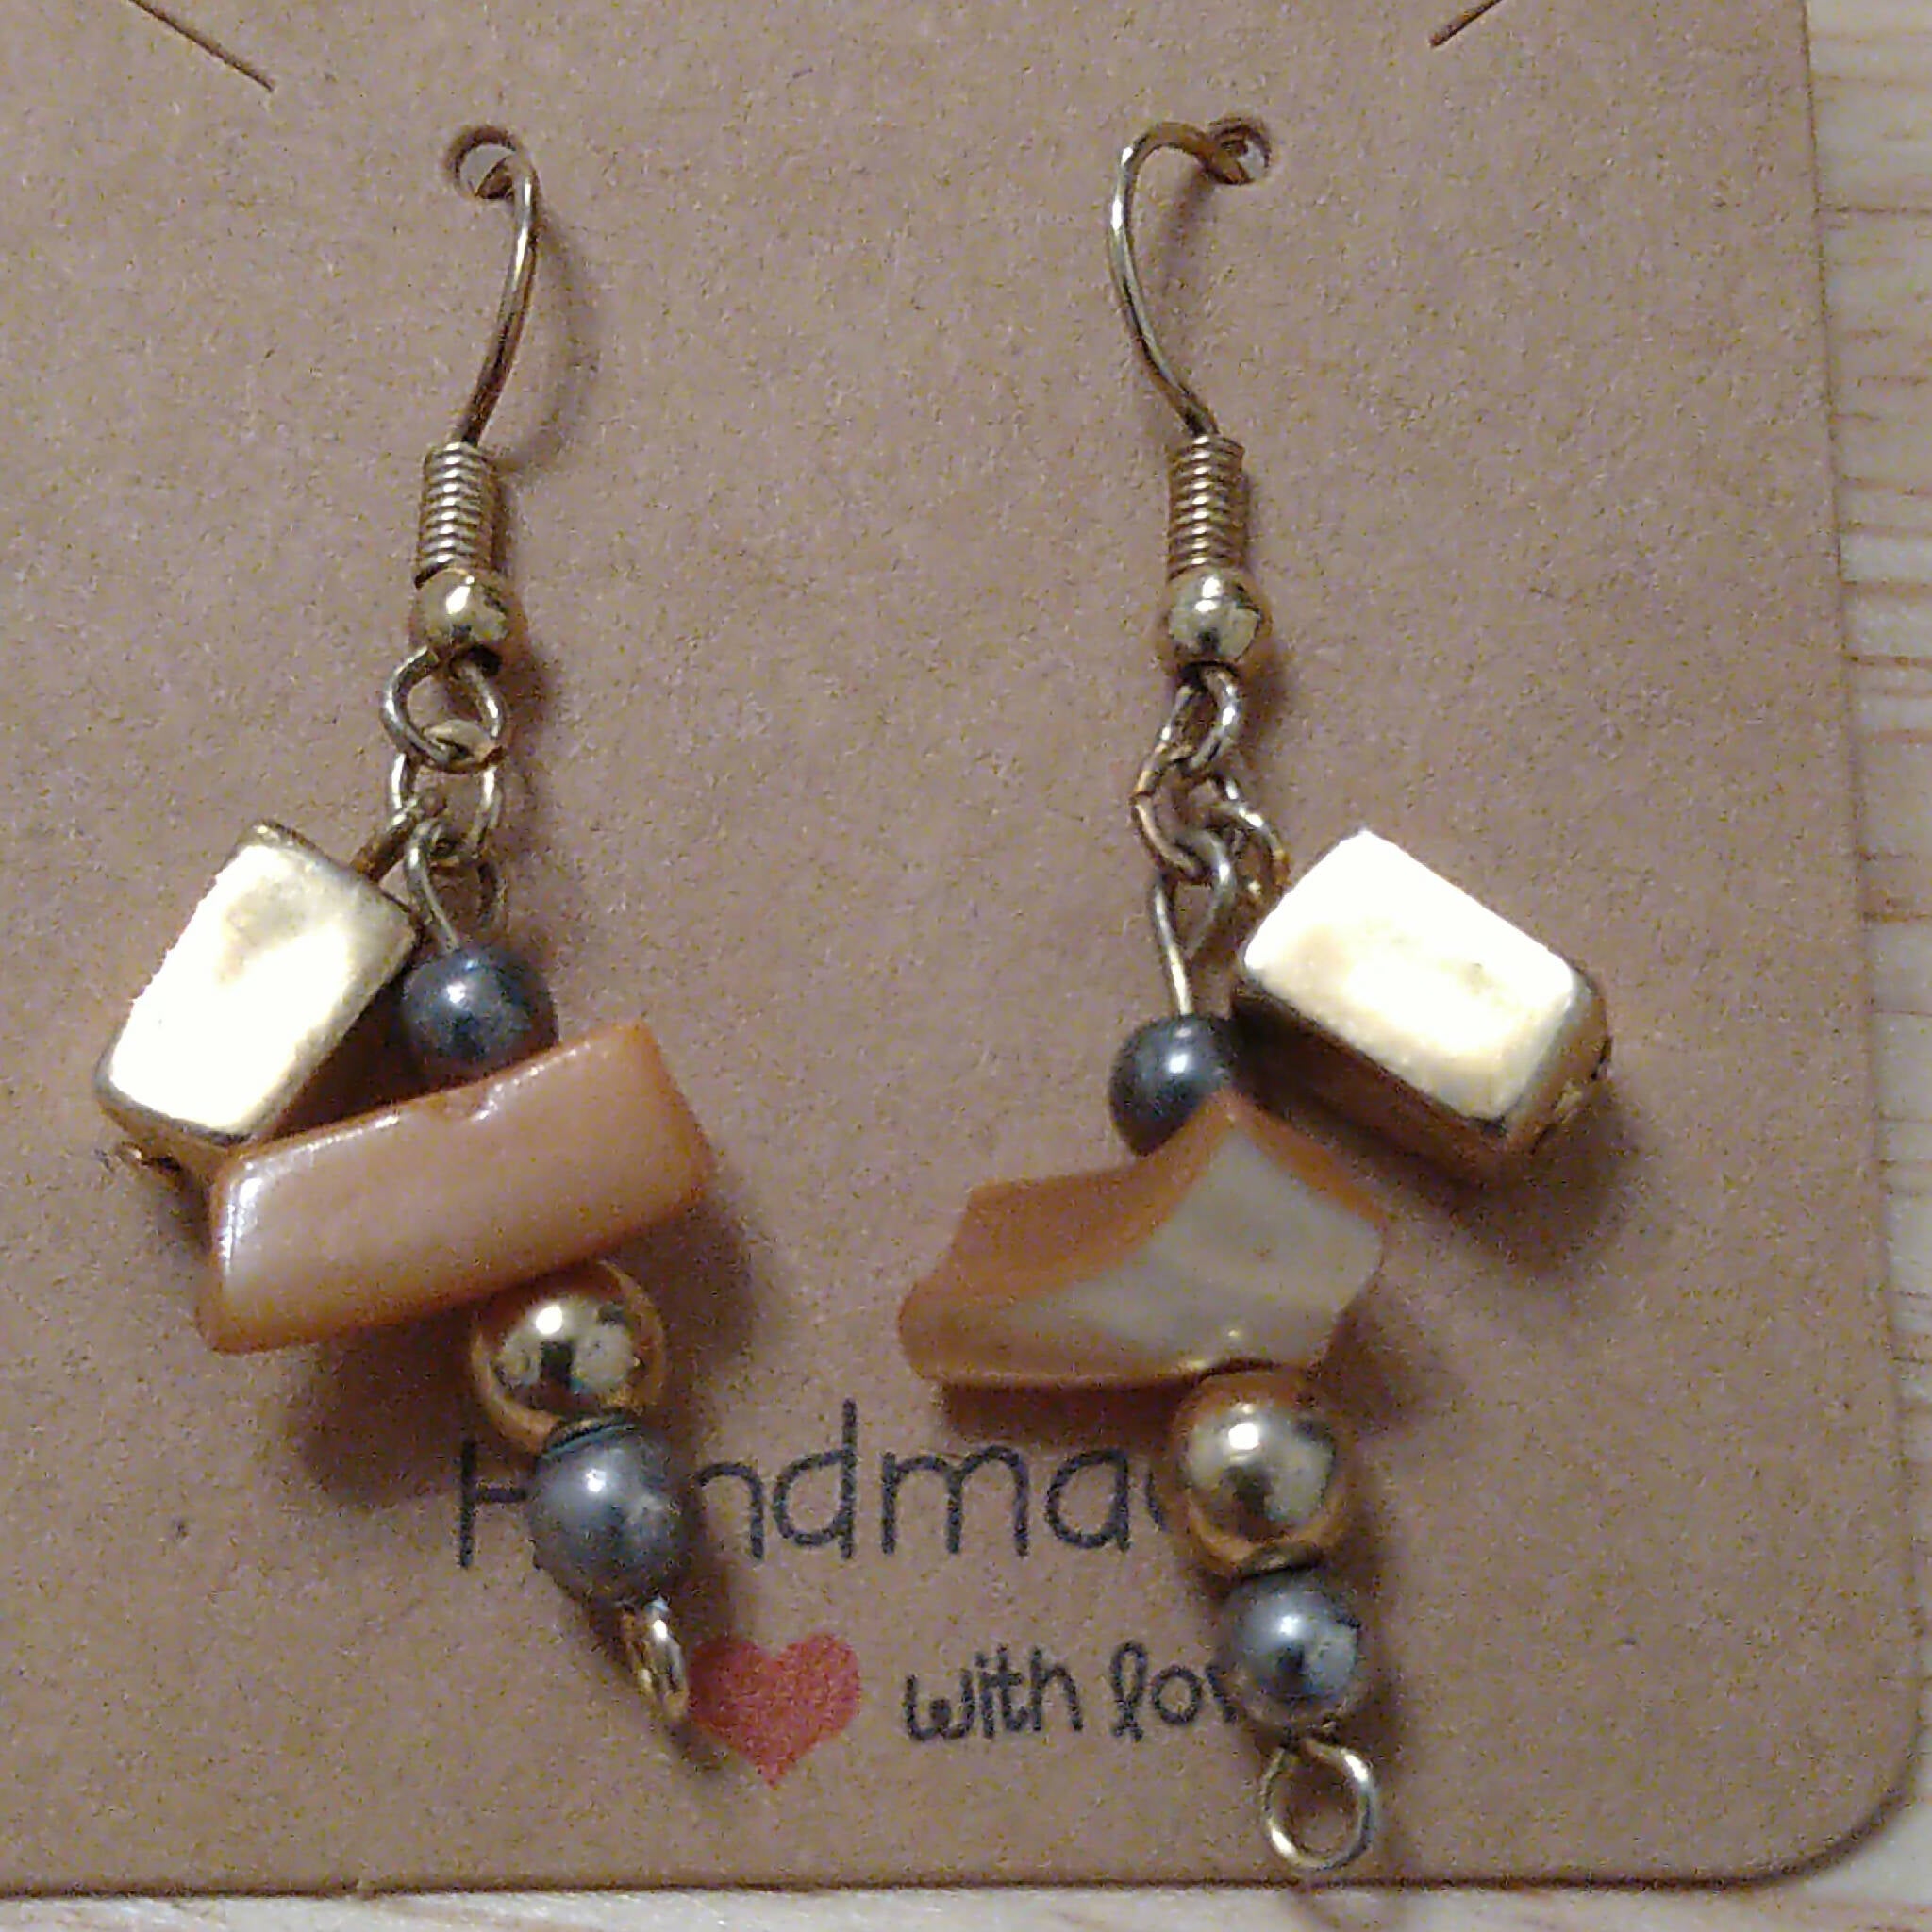 Handmade earrings with mixed metal coloured beads & stone chips